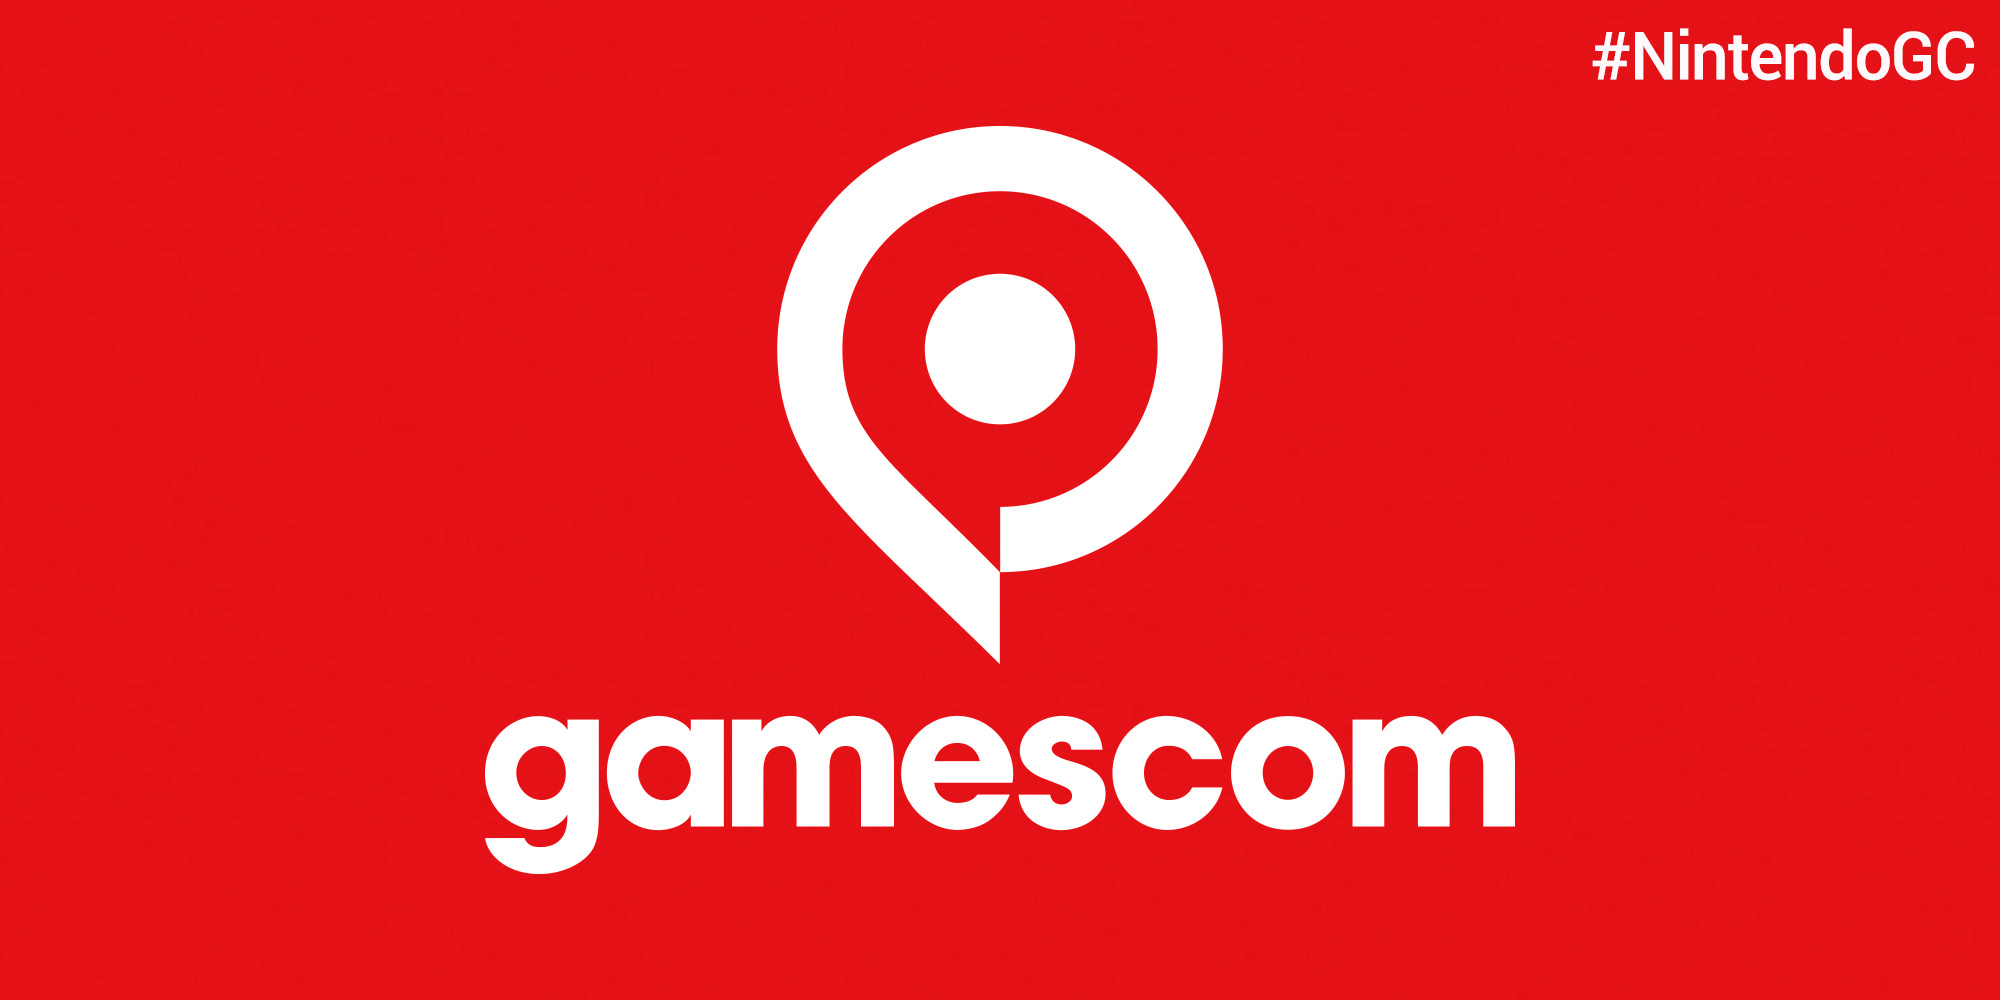 Nintendo brings games for every kind of gamer to gamescom 2019